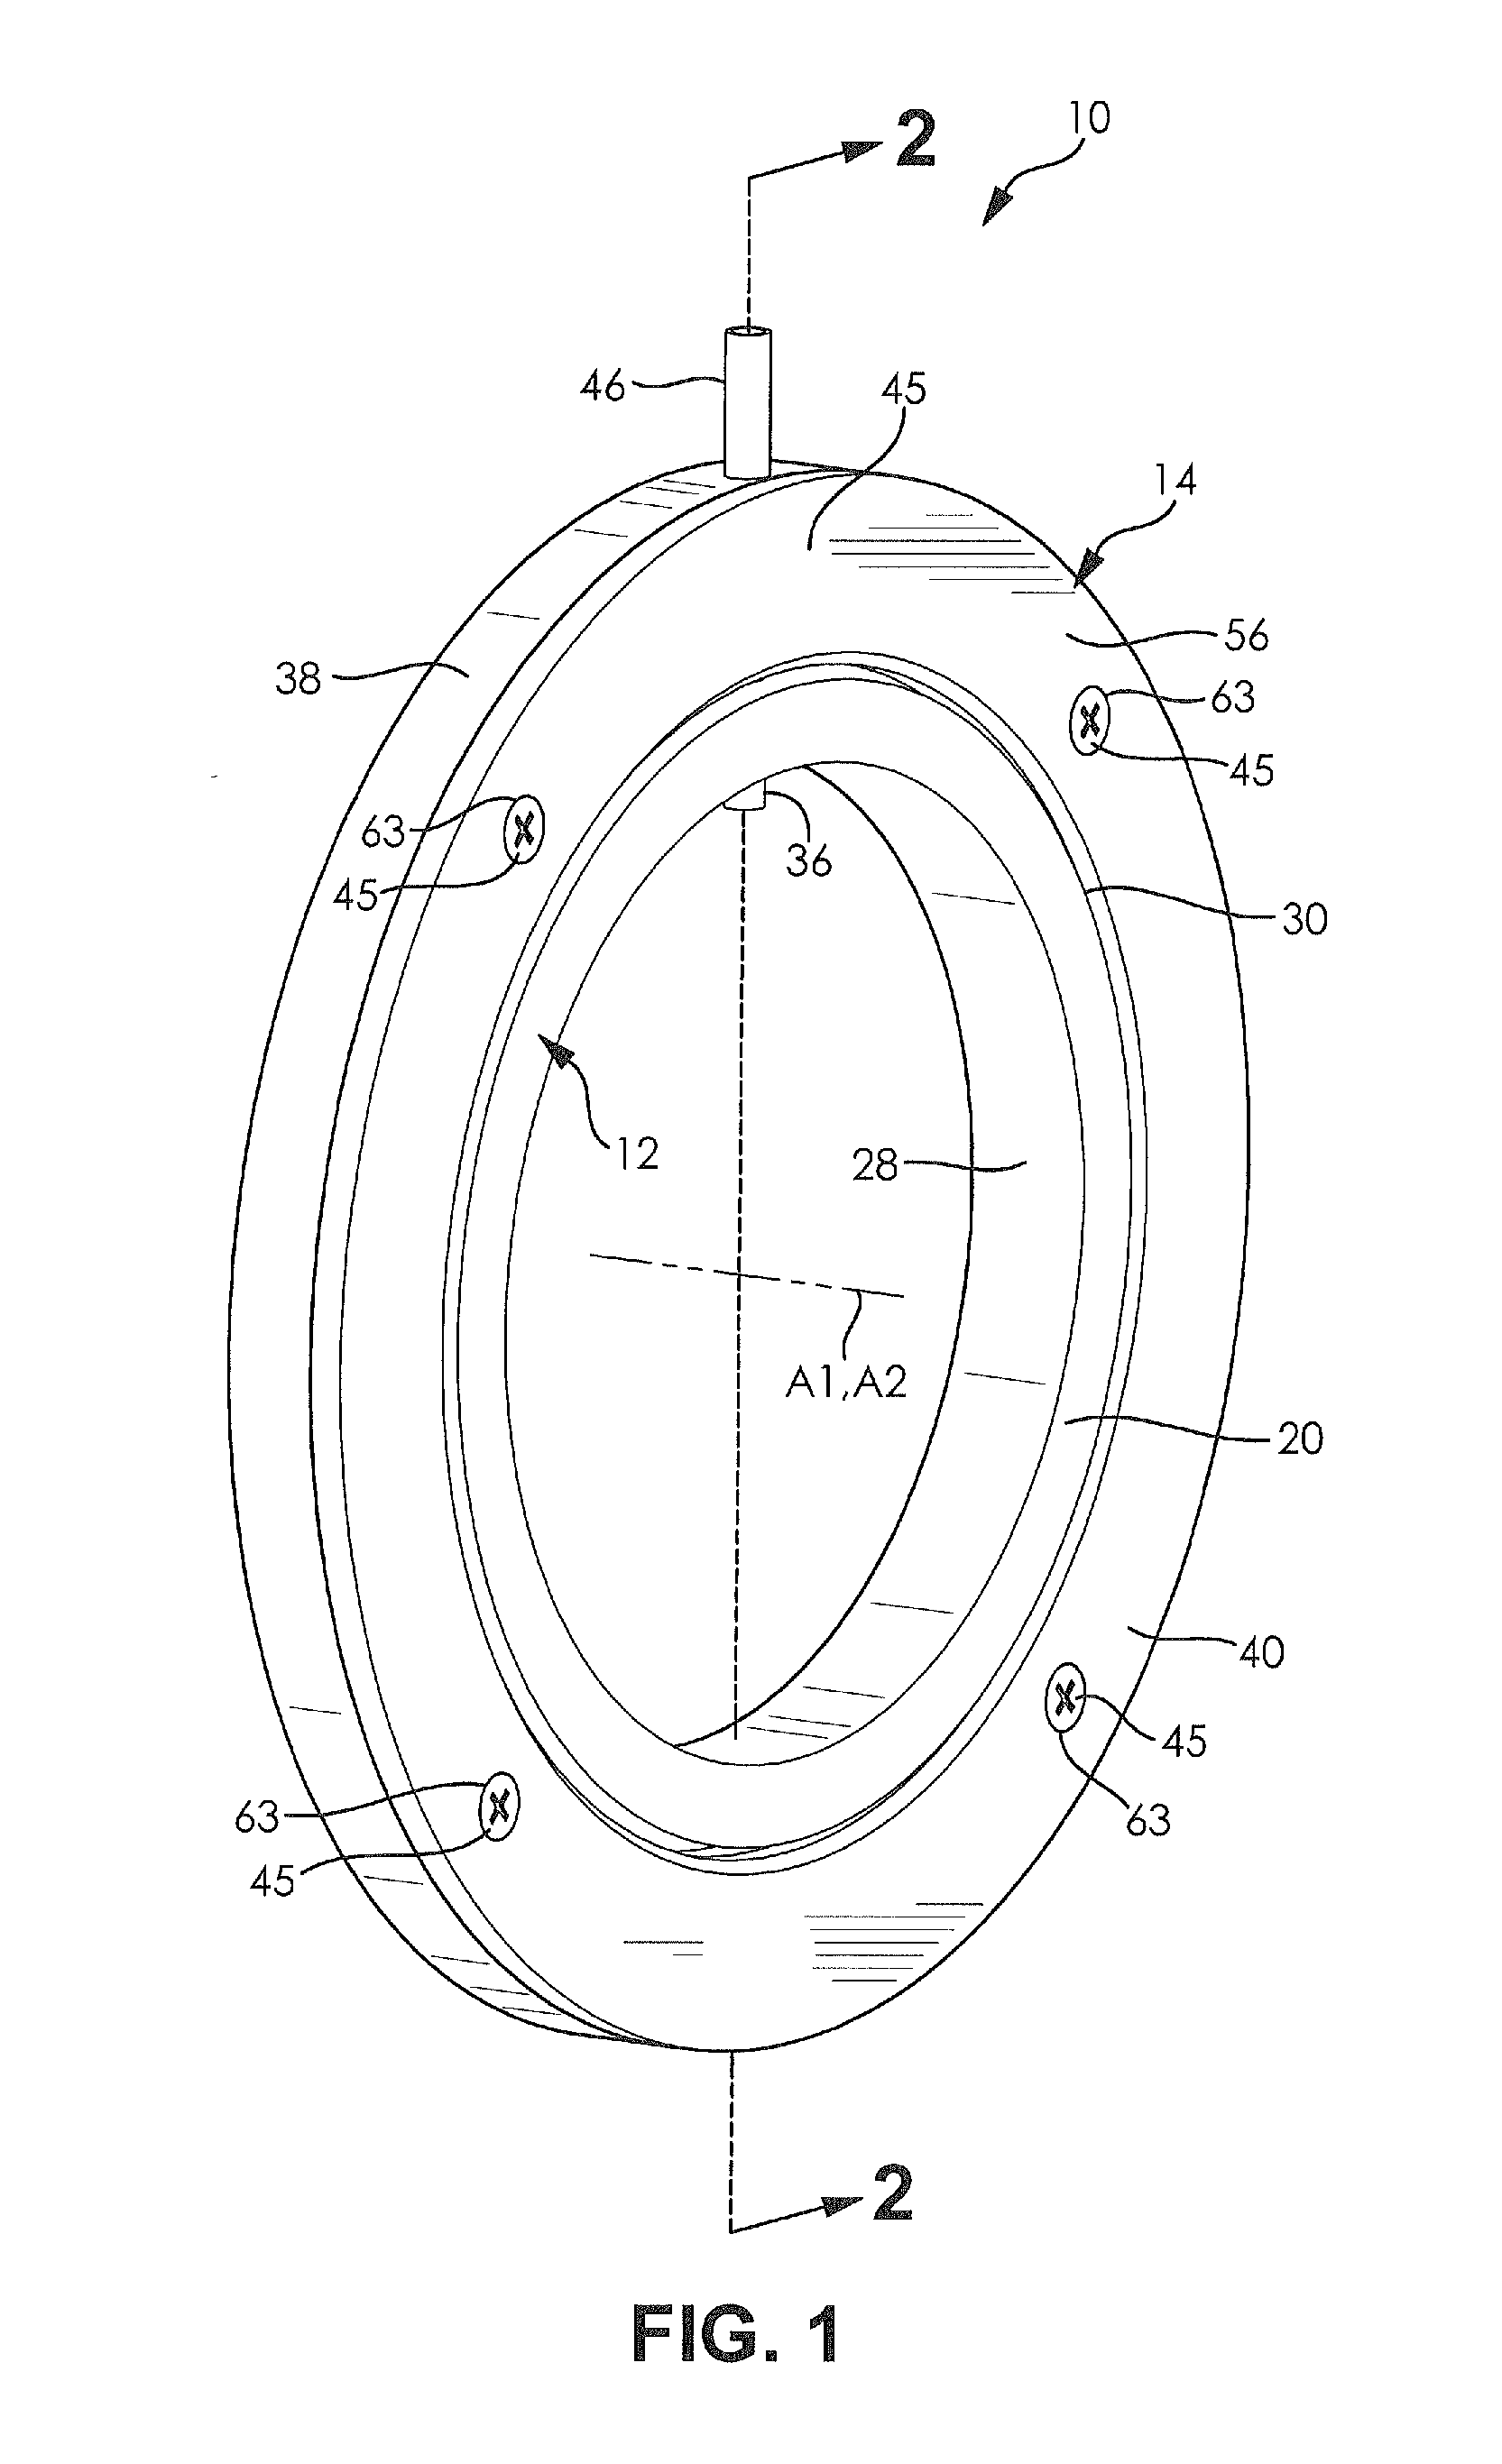 Rotary union for use with a fluid conduit